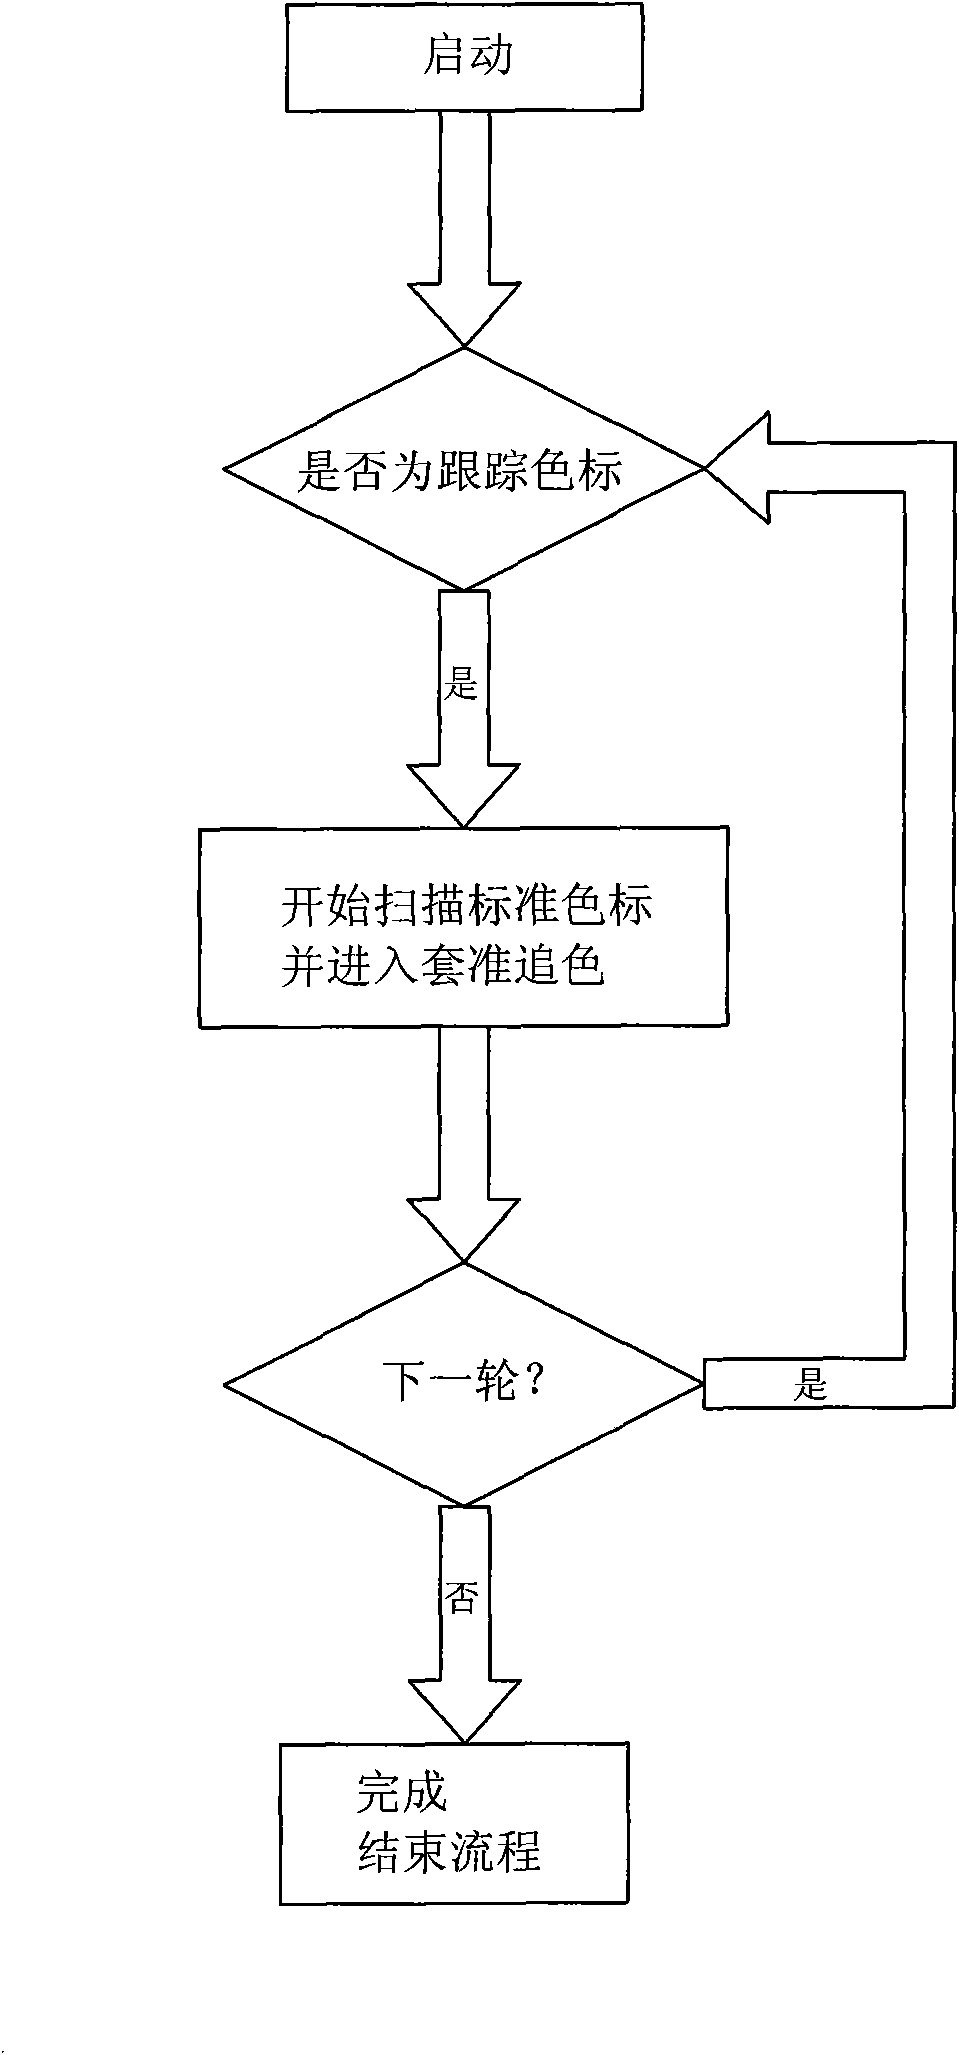 Method for overprinting color identification and make-up applied to gravure printing